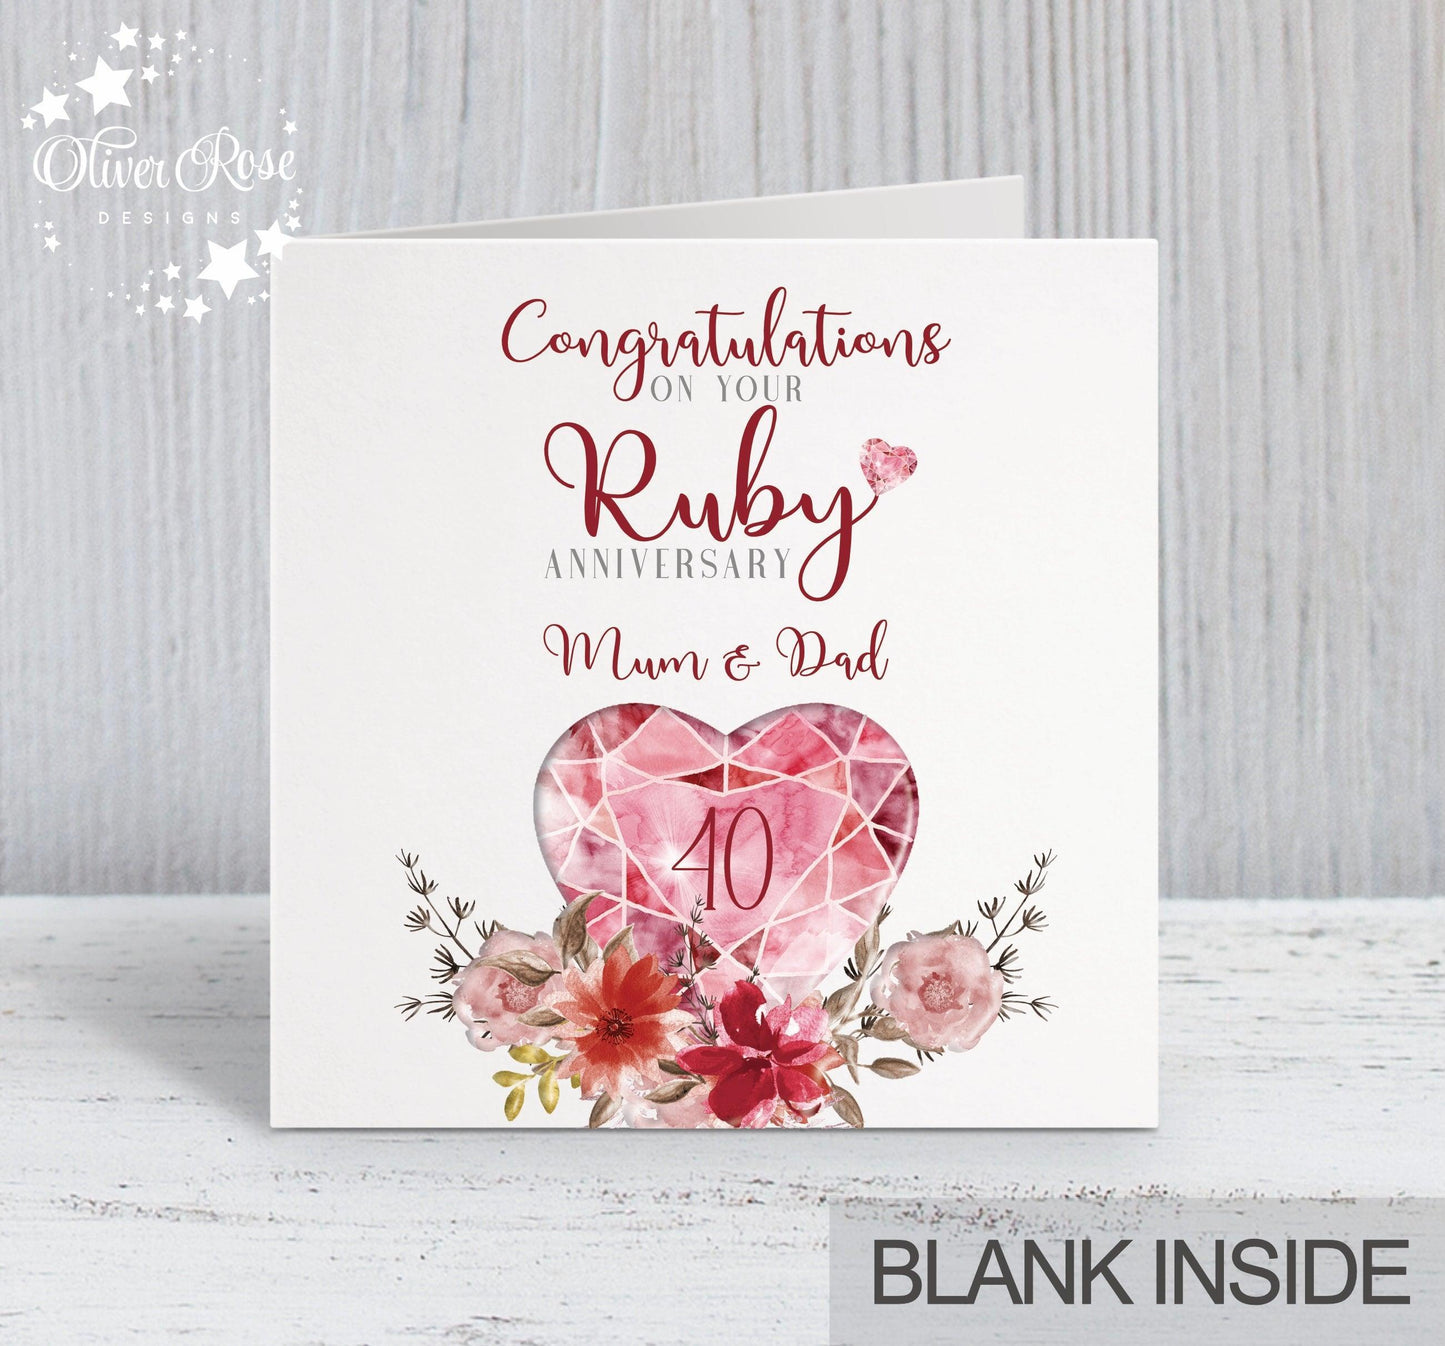 40th Ruby Anniversary Card, Congratulations on your Ruby Anniversary, Mum & Dad, 40 years